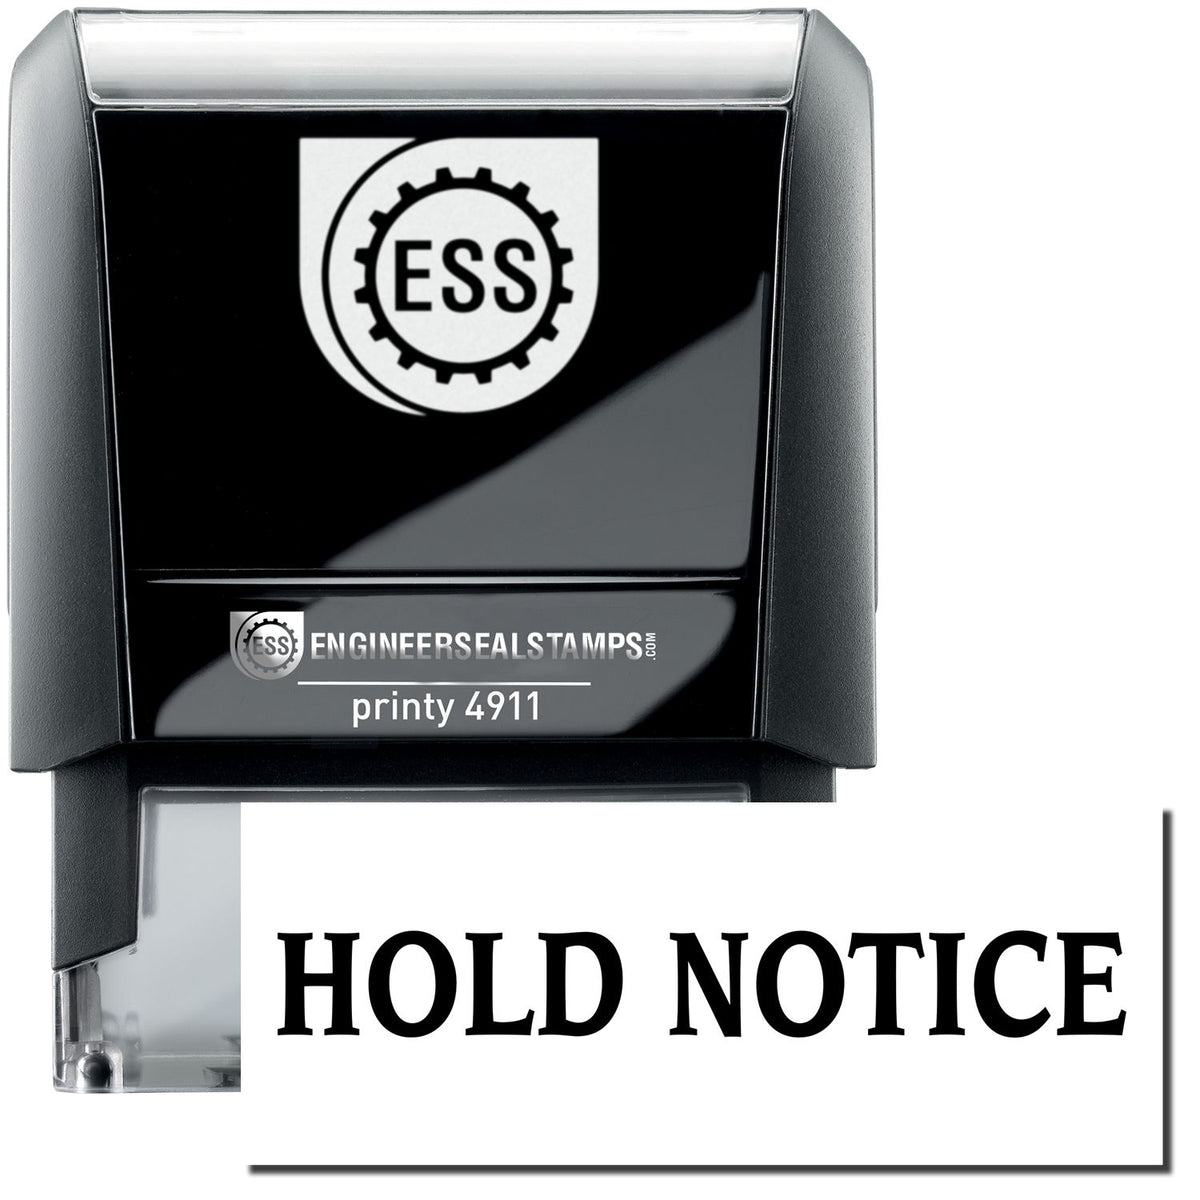 A self-inking stamp with a stamped image showing how the text &quot;HOLD NOTICE&quot; is displayed after stamping.